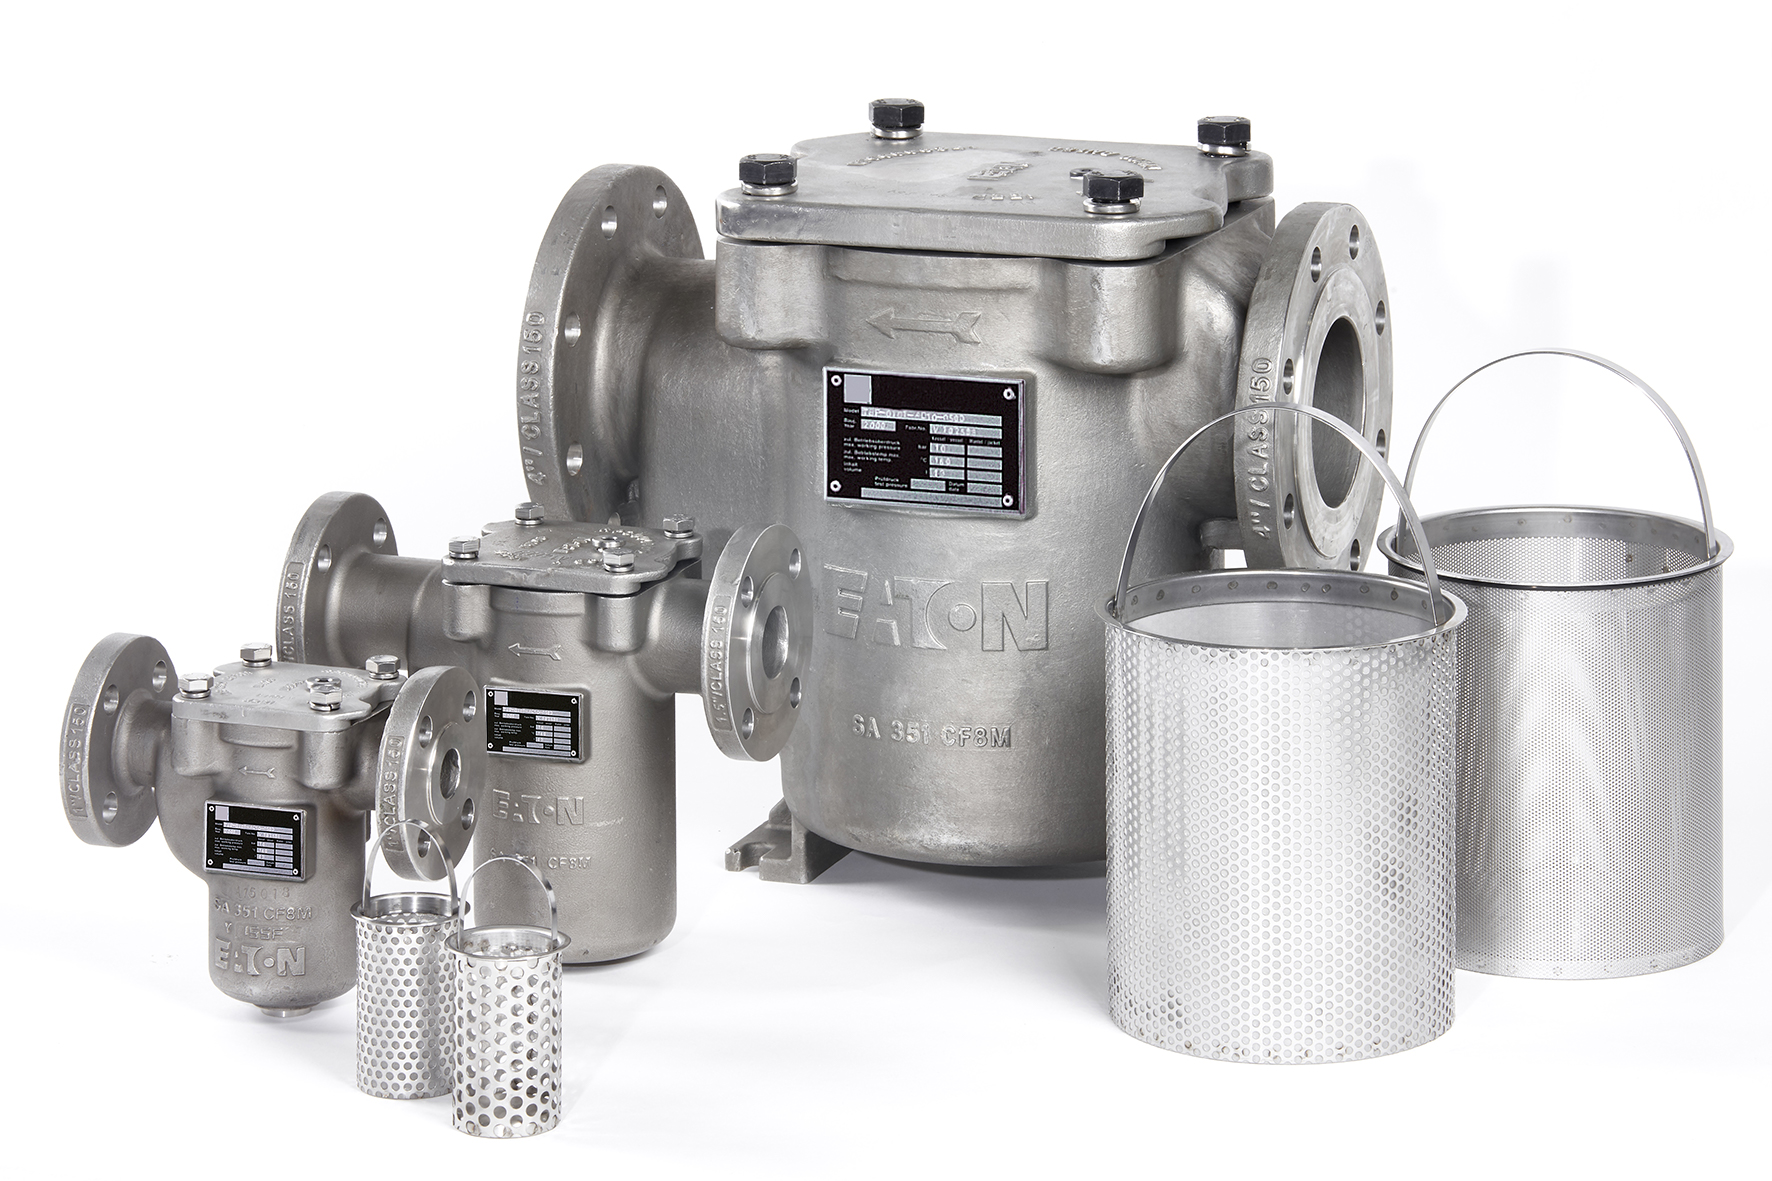 The Simplex 72X strainers provide full bypass-free filtration which protects process equipment in applications including chemical, petrochemical and water pipelines.